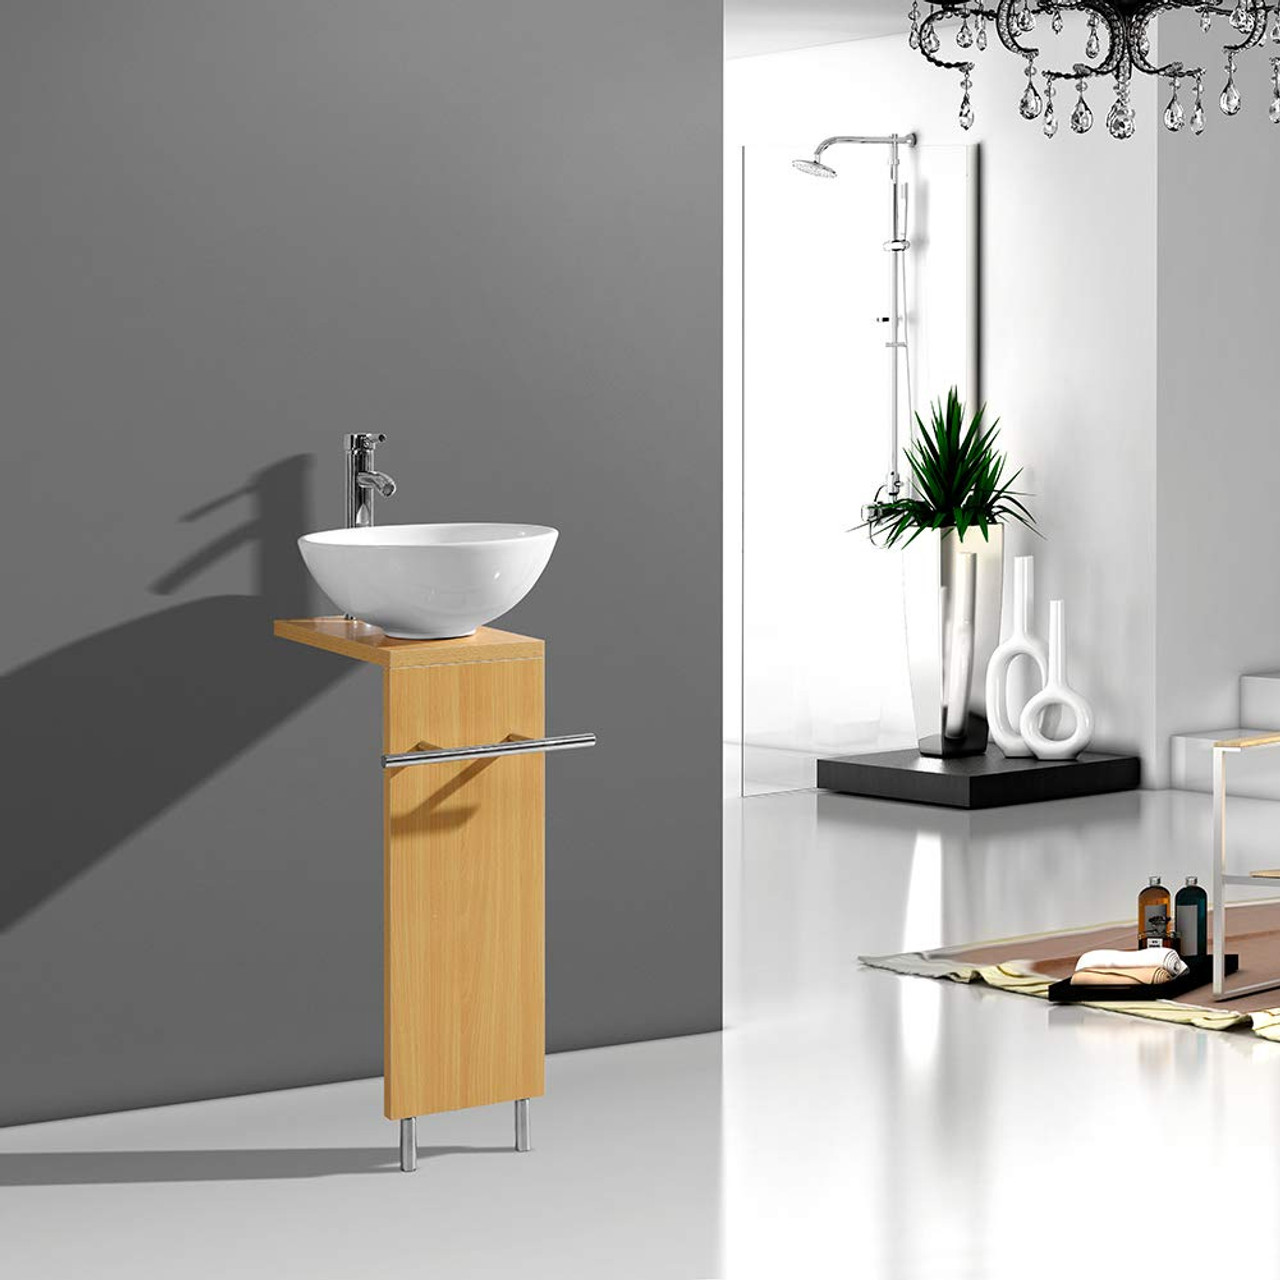 Lorixon LV-002RH Small Modern Bathroom Vanity Clear Tempered Glass Bowl  Handmade Sink Unique Pattern Wall Mount Floating Stainless Steel Pedestal  Combo Set - Lorixon Product